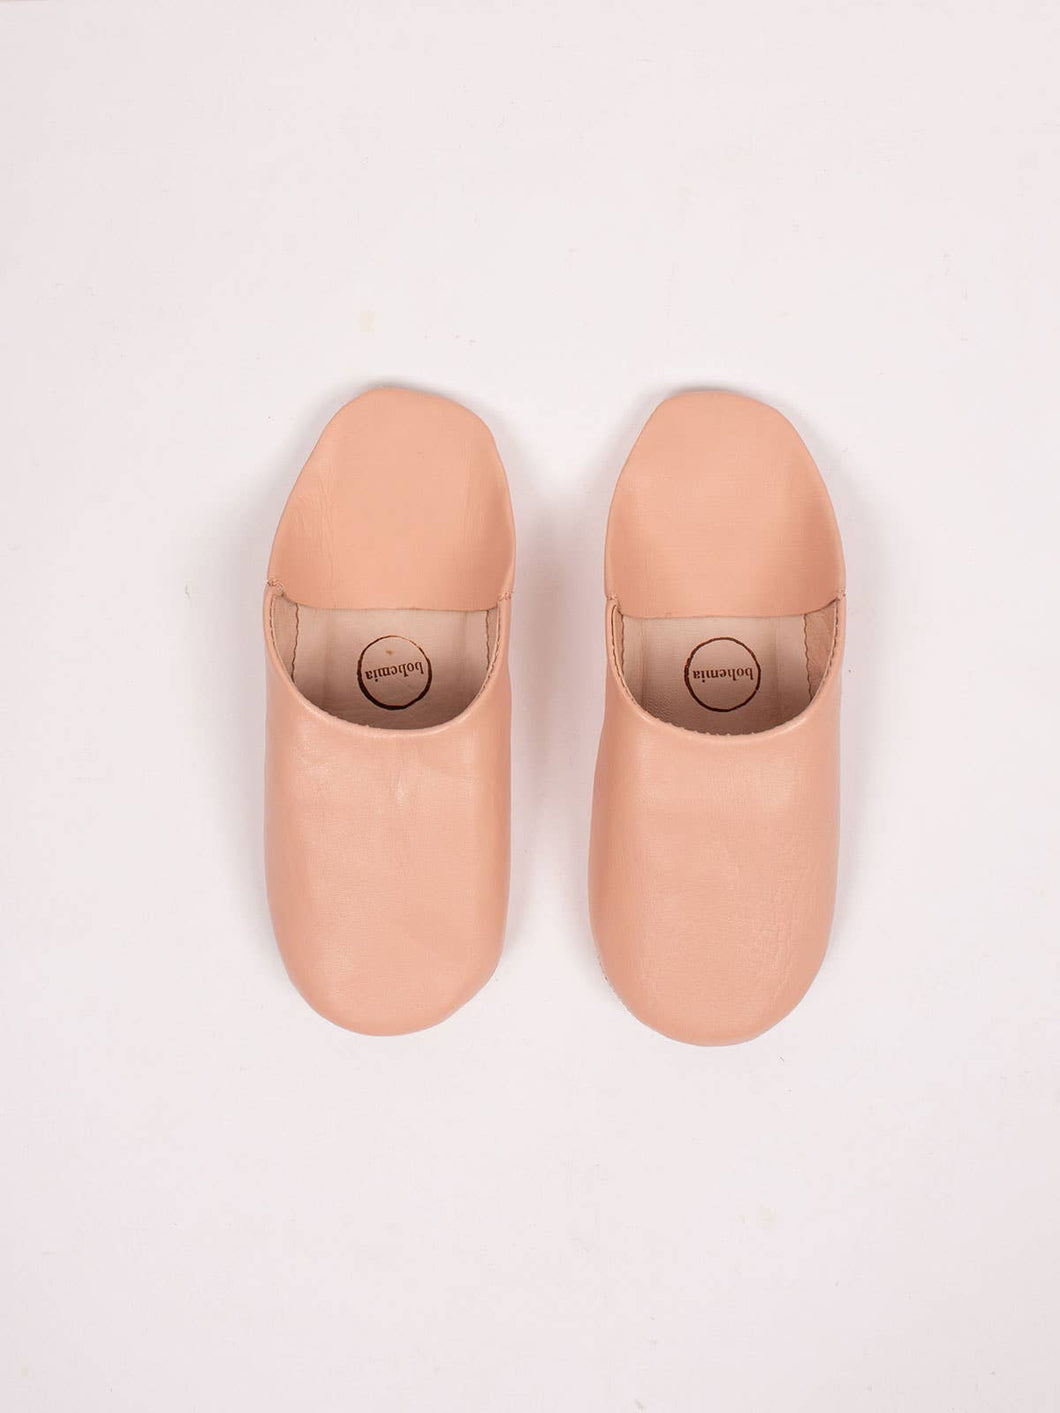 Moroccan Babouche Slippers, Ballet Pink - Small